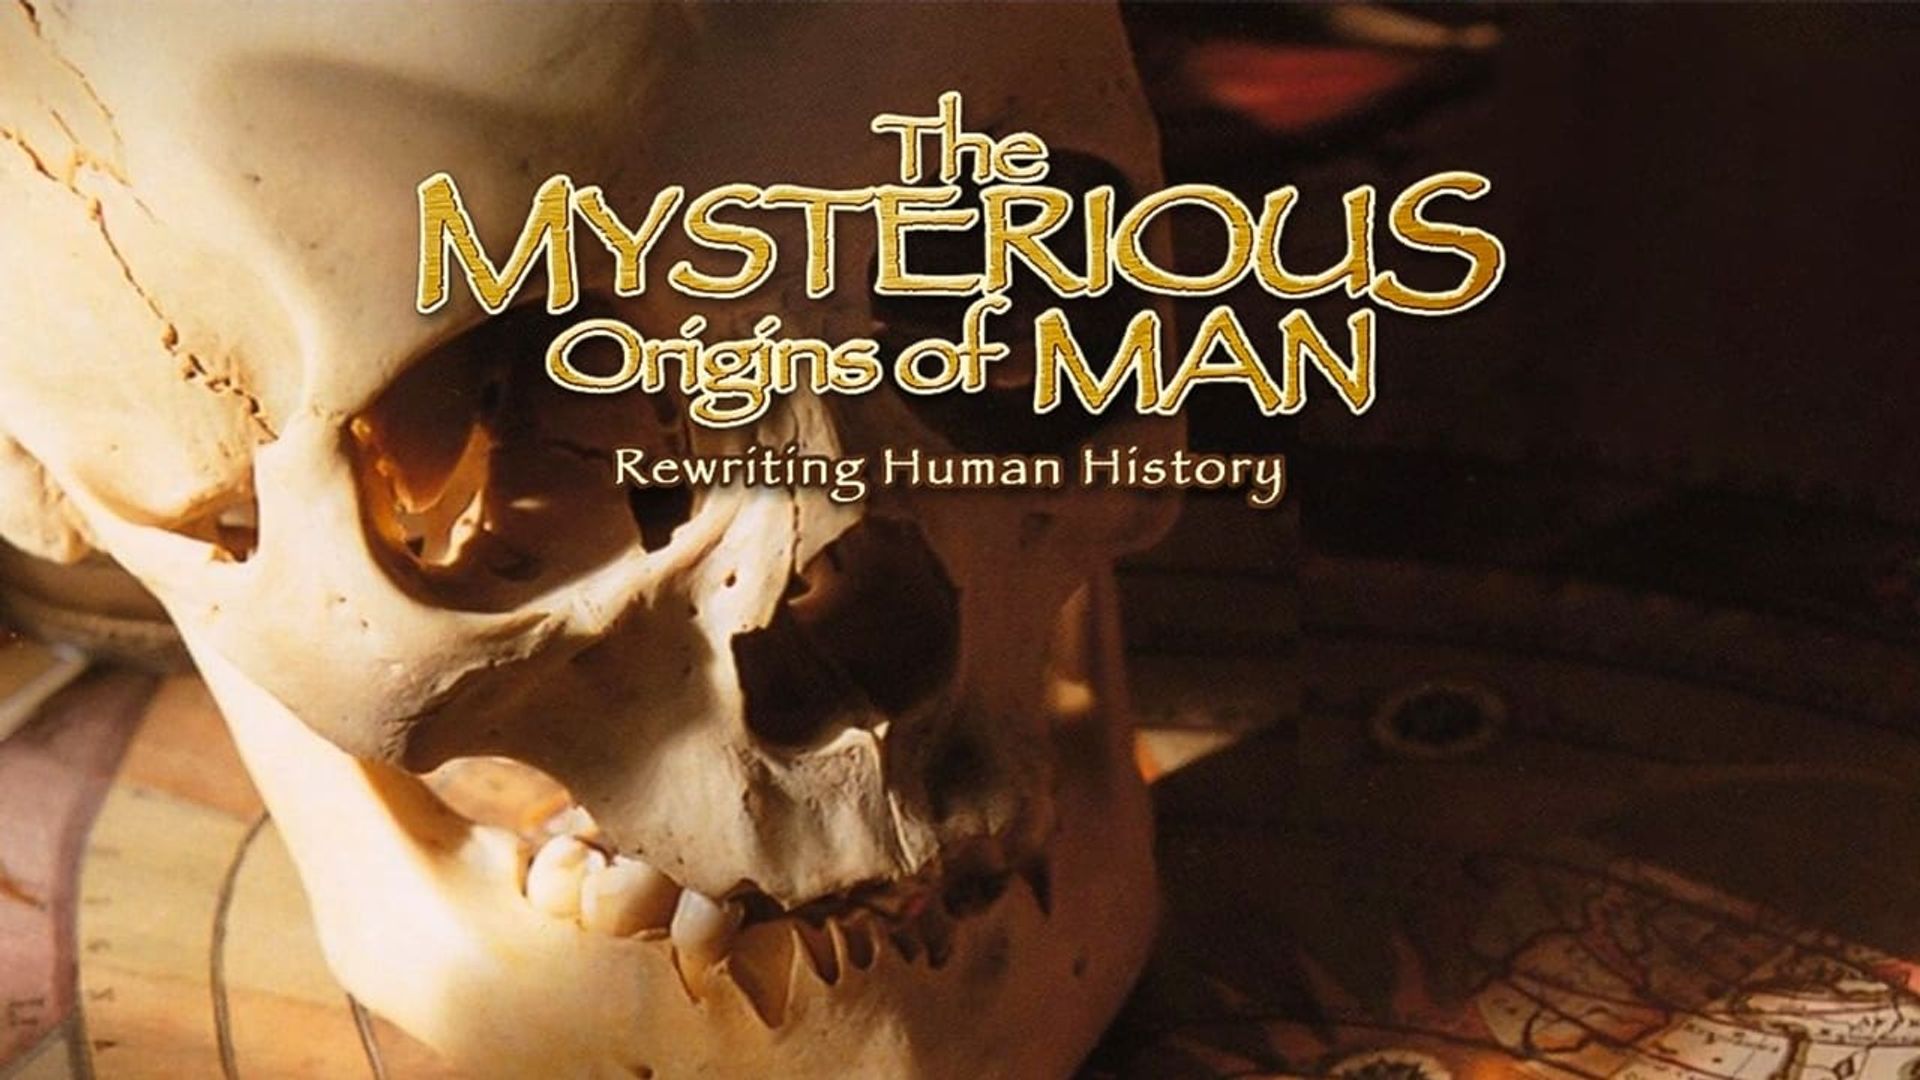 The Mysterious Origins of Man background